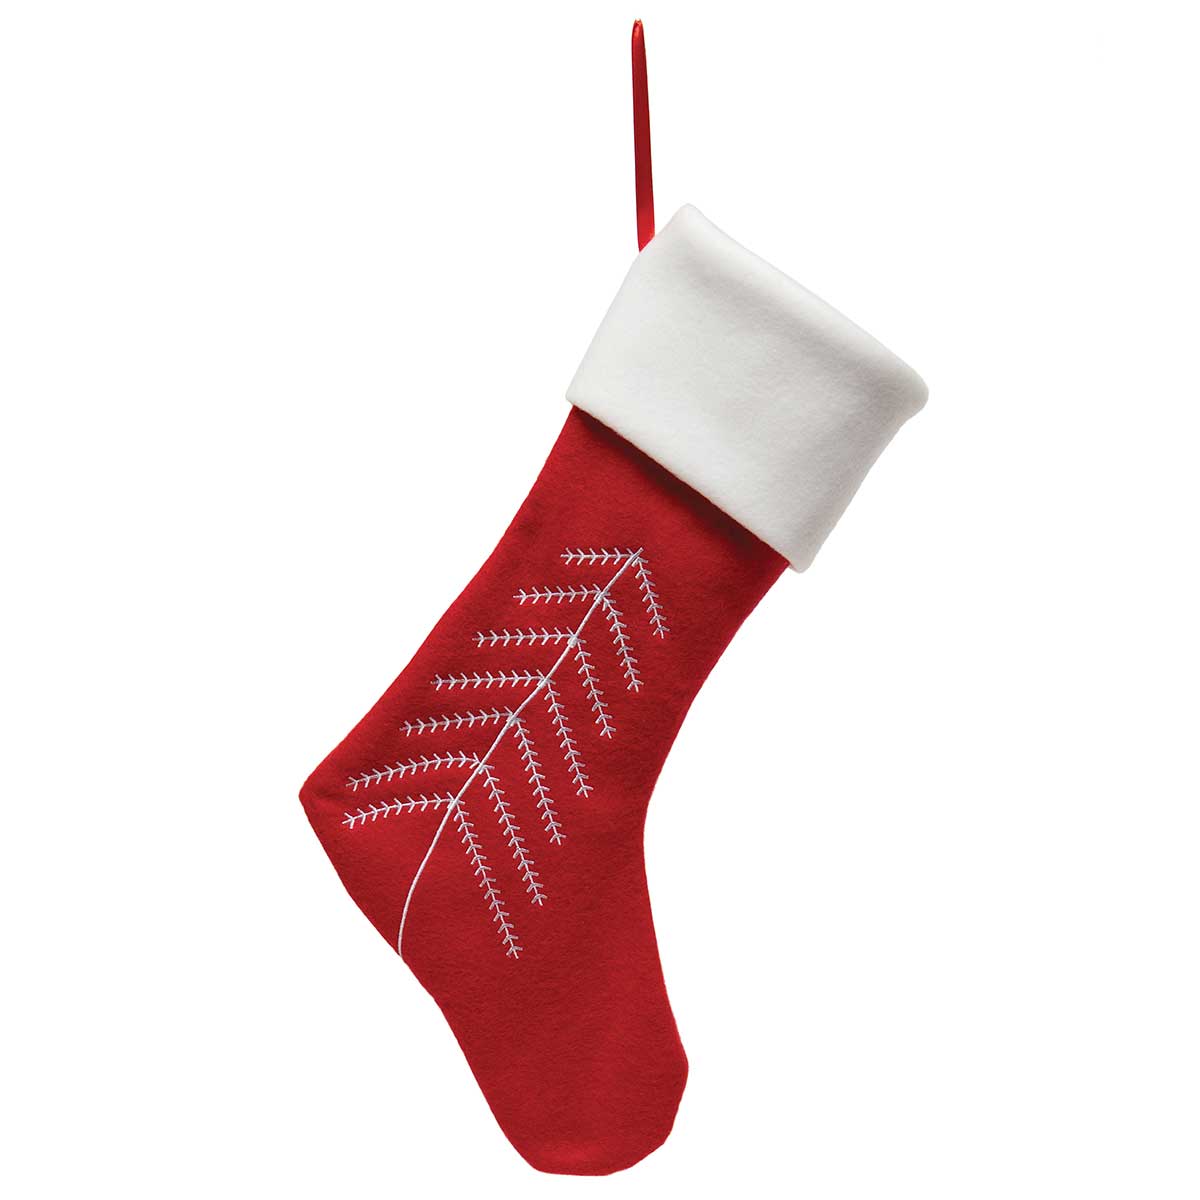 !SCANDIA STOCKING RED/WHITE WITH EMBROIDERED TREE DESIGN